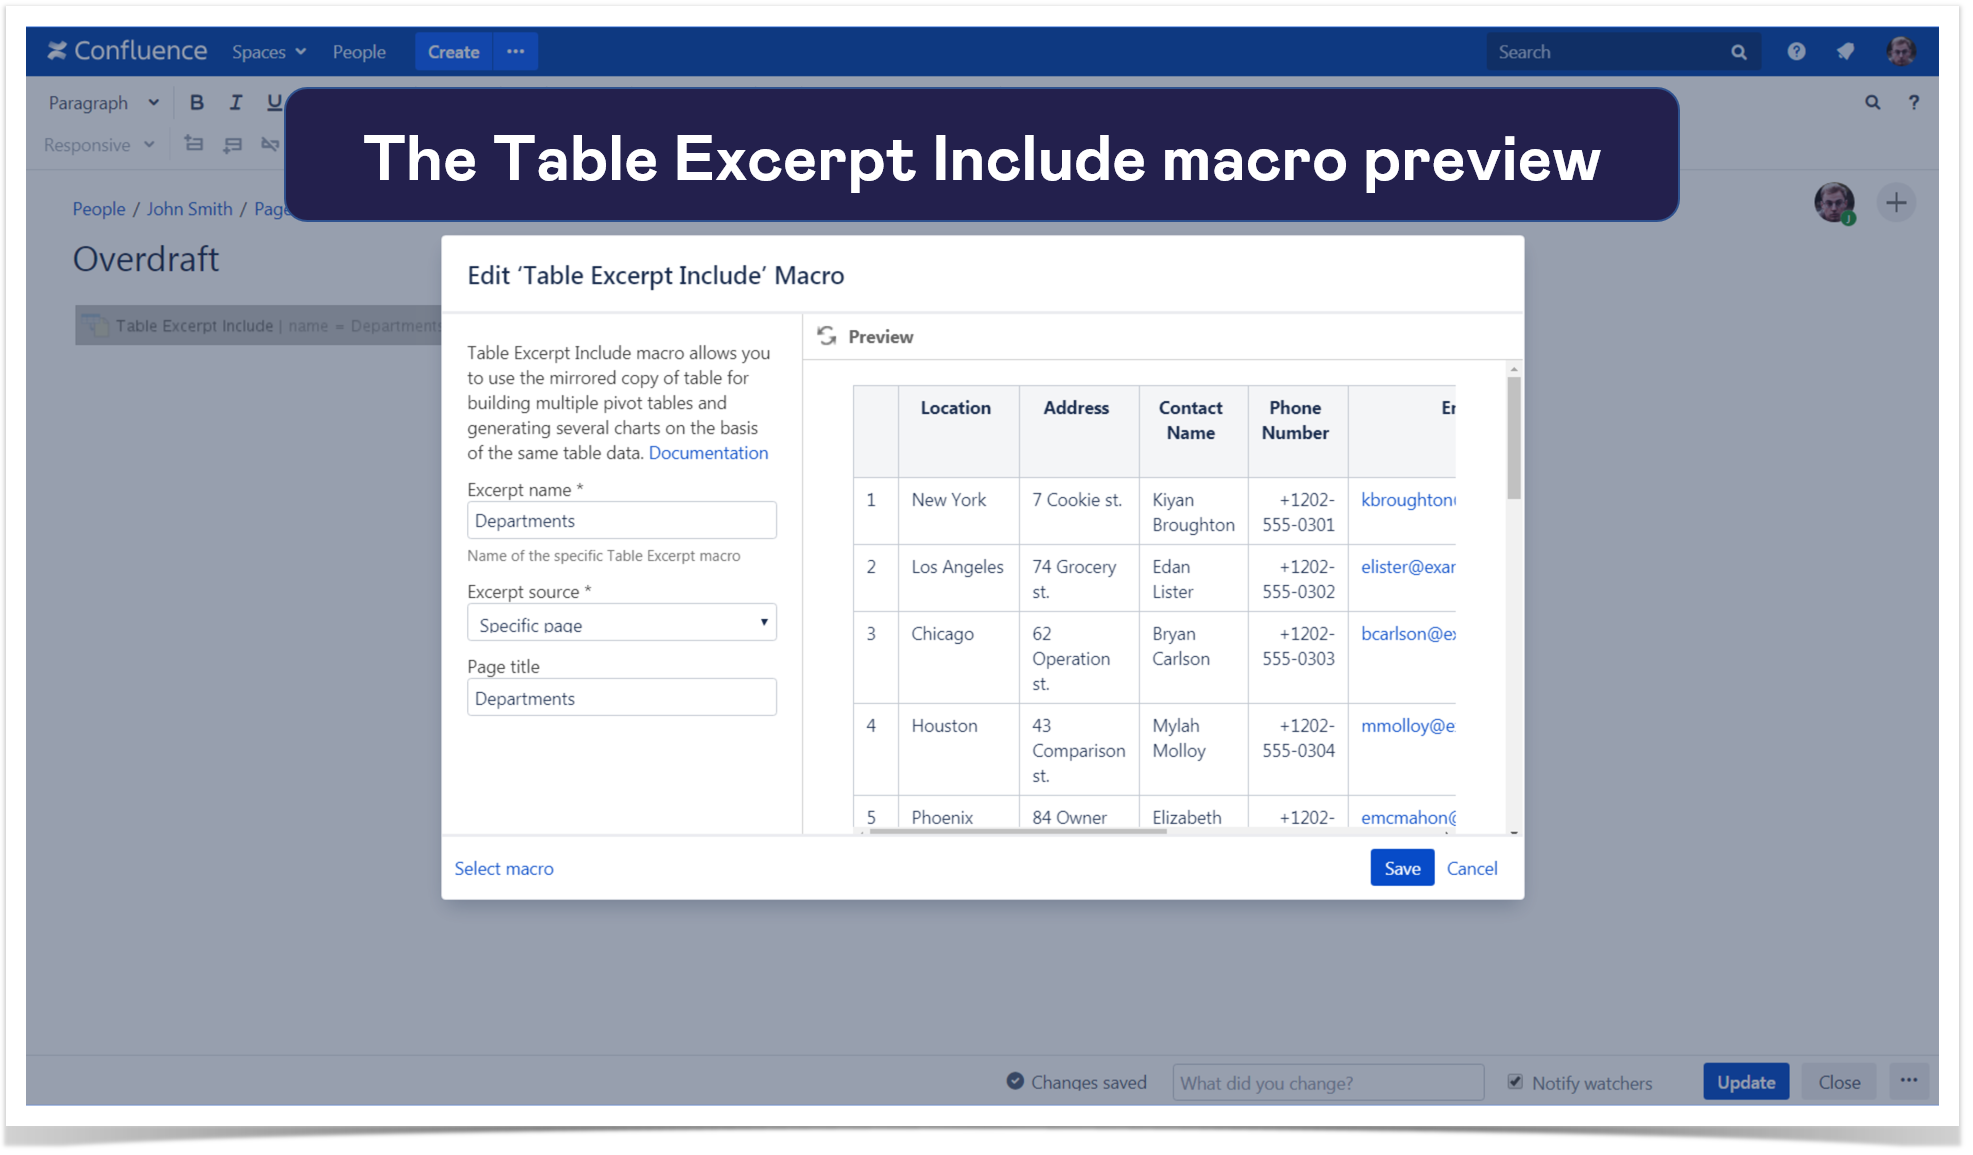 Table Excerpt Include macro preview